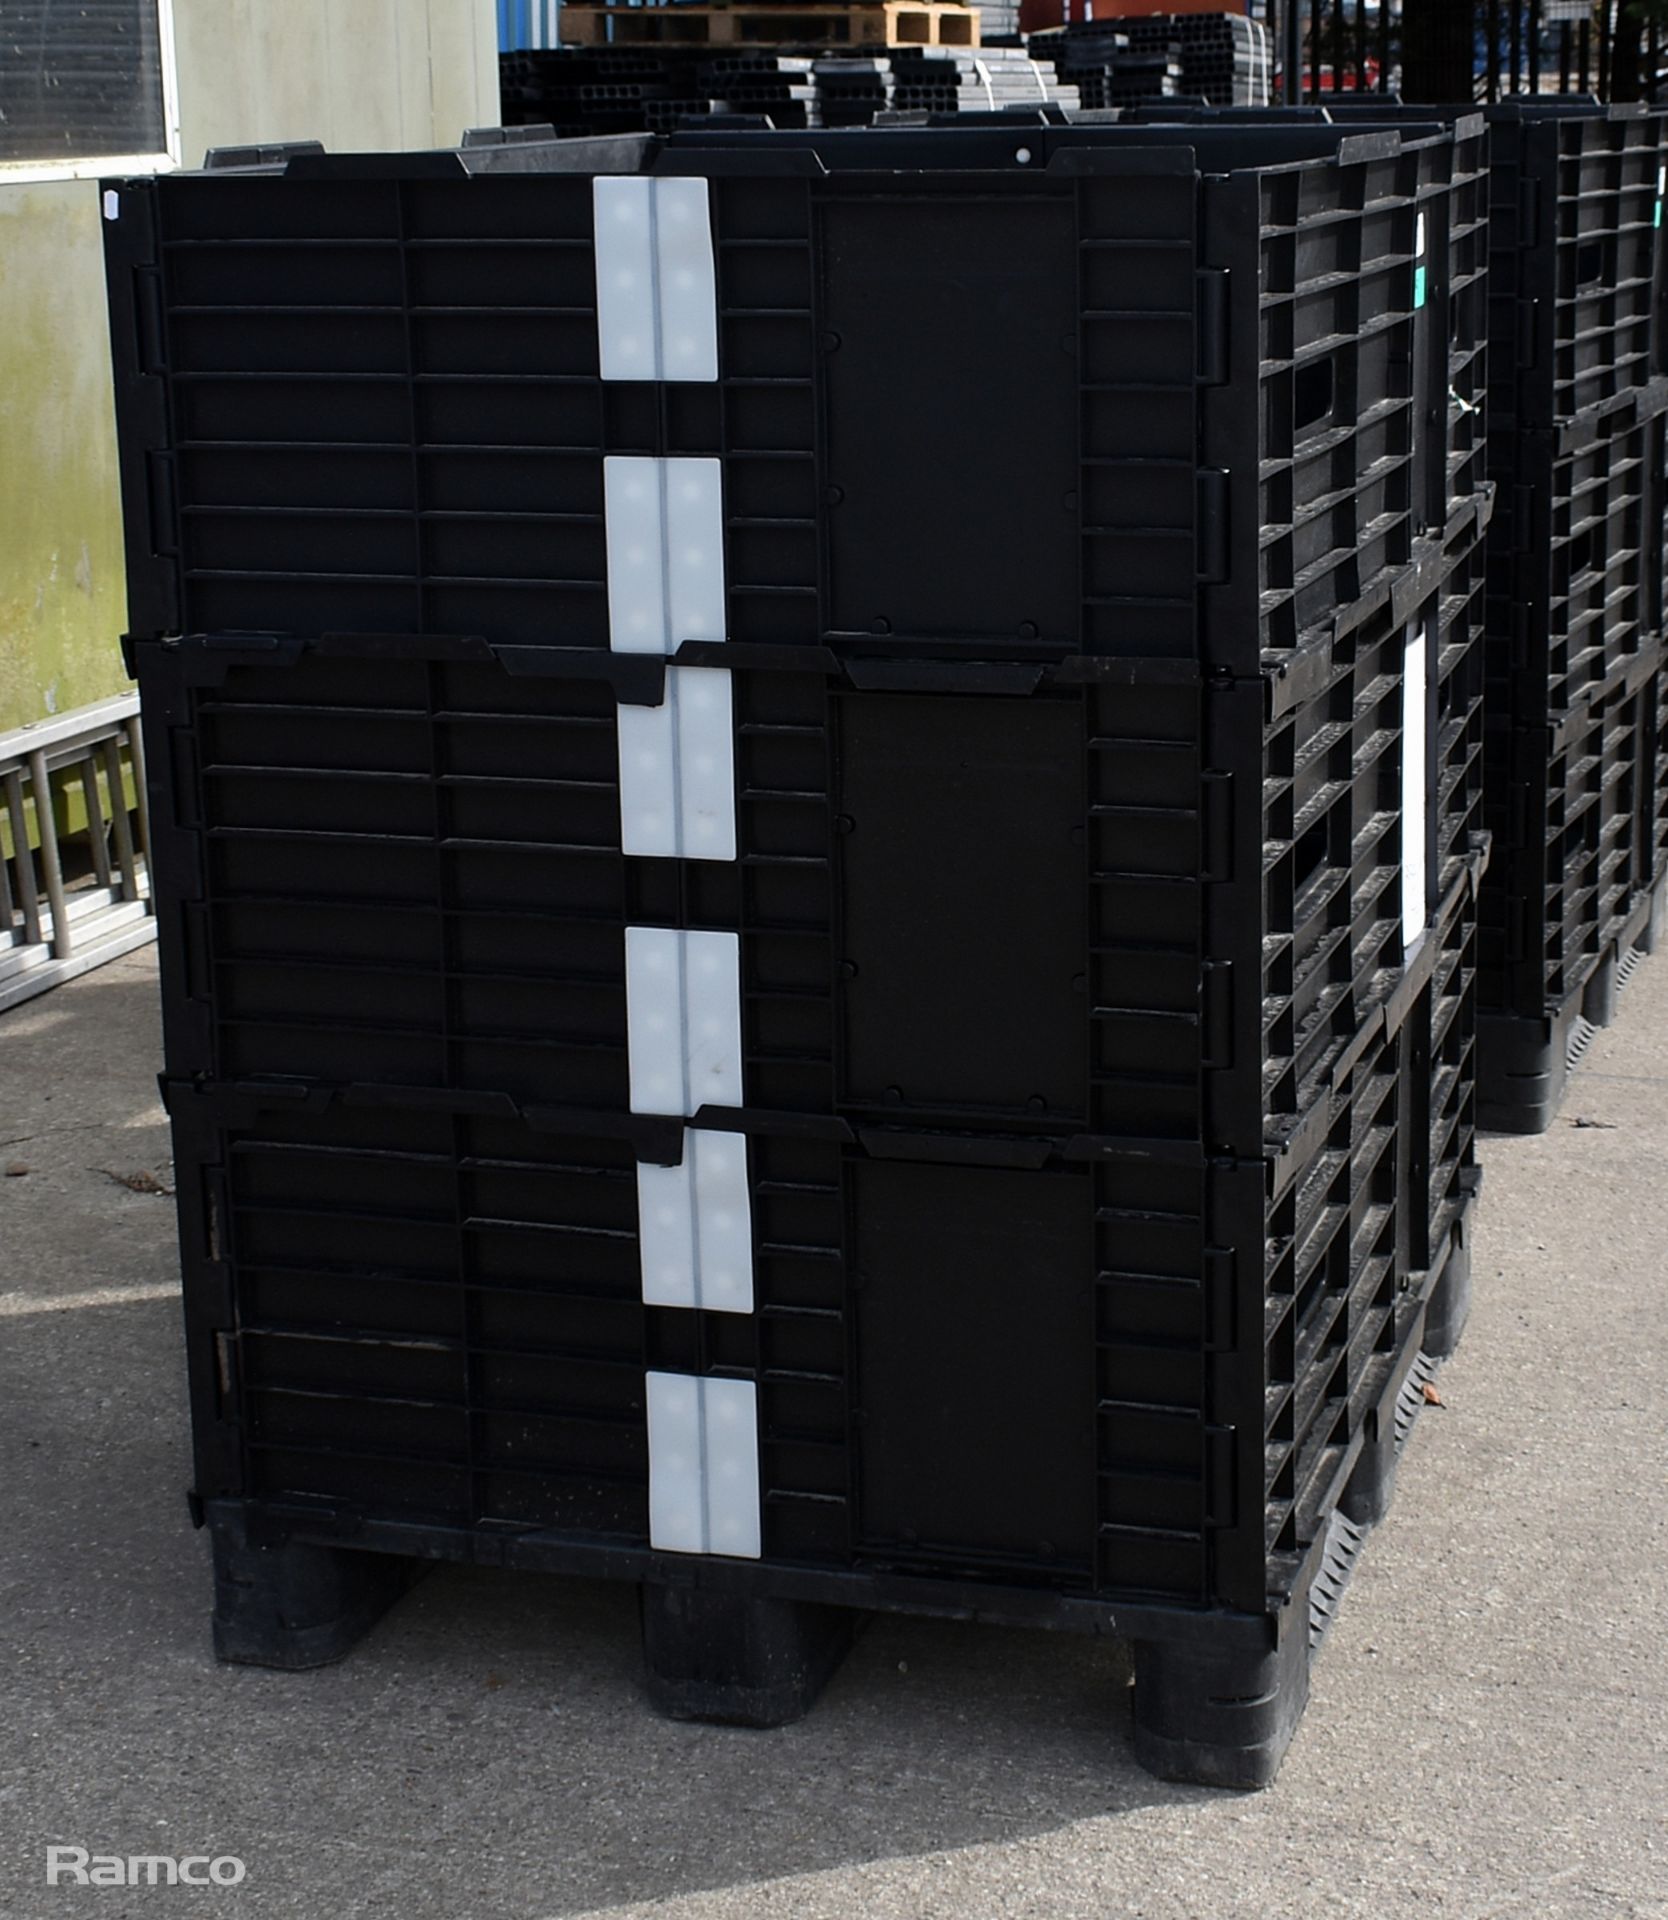 Plastic pallet with 3 plastic collar layers - standard uk pallet size: 1.2 m x 1m - Image 2 of 3